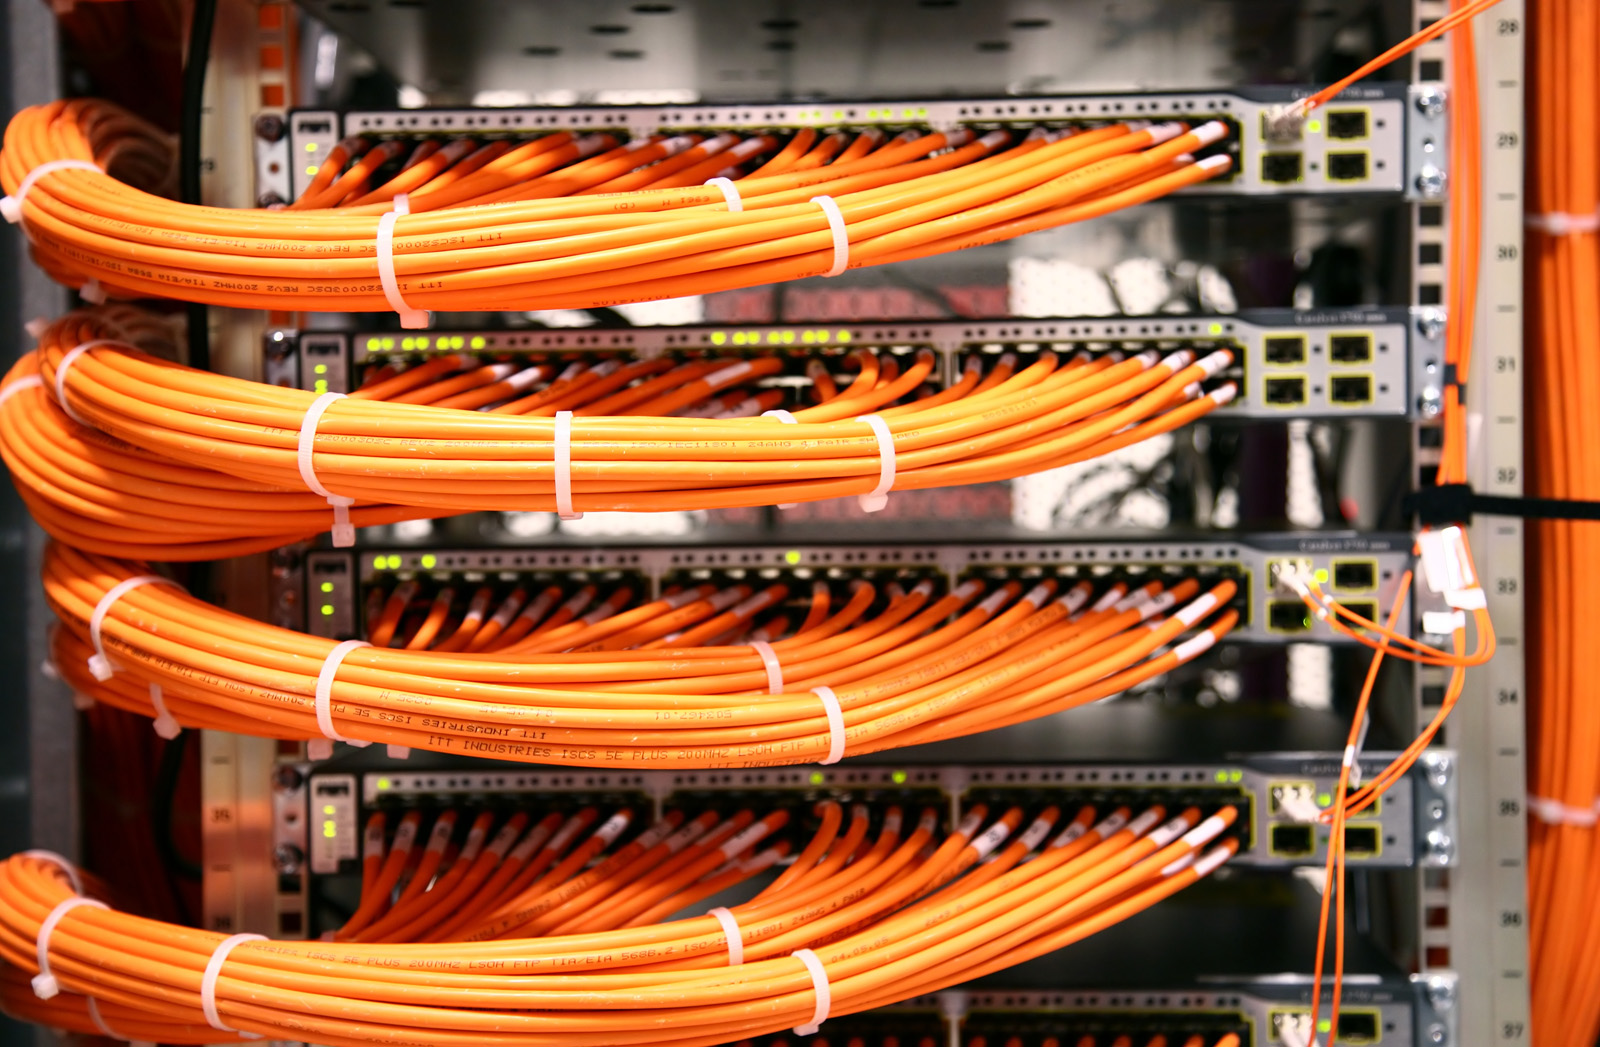 Radcliff Kentucky Trusted Voice & Data Network Cabling Solutions